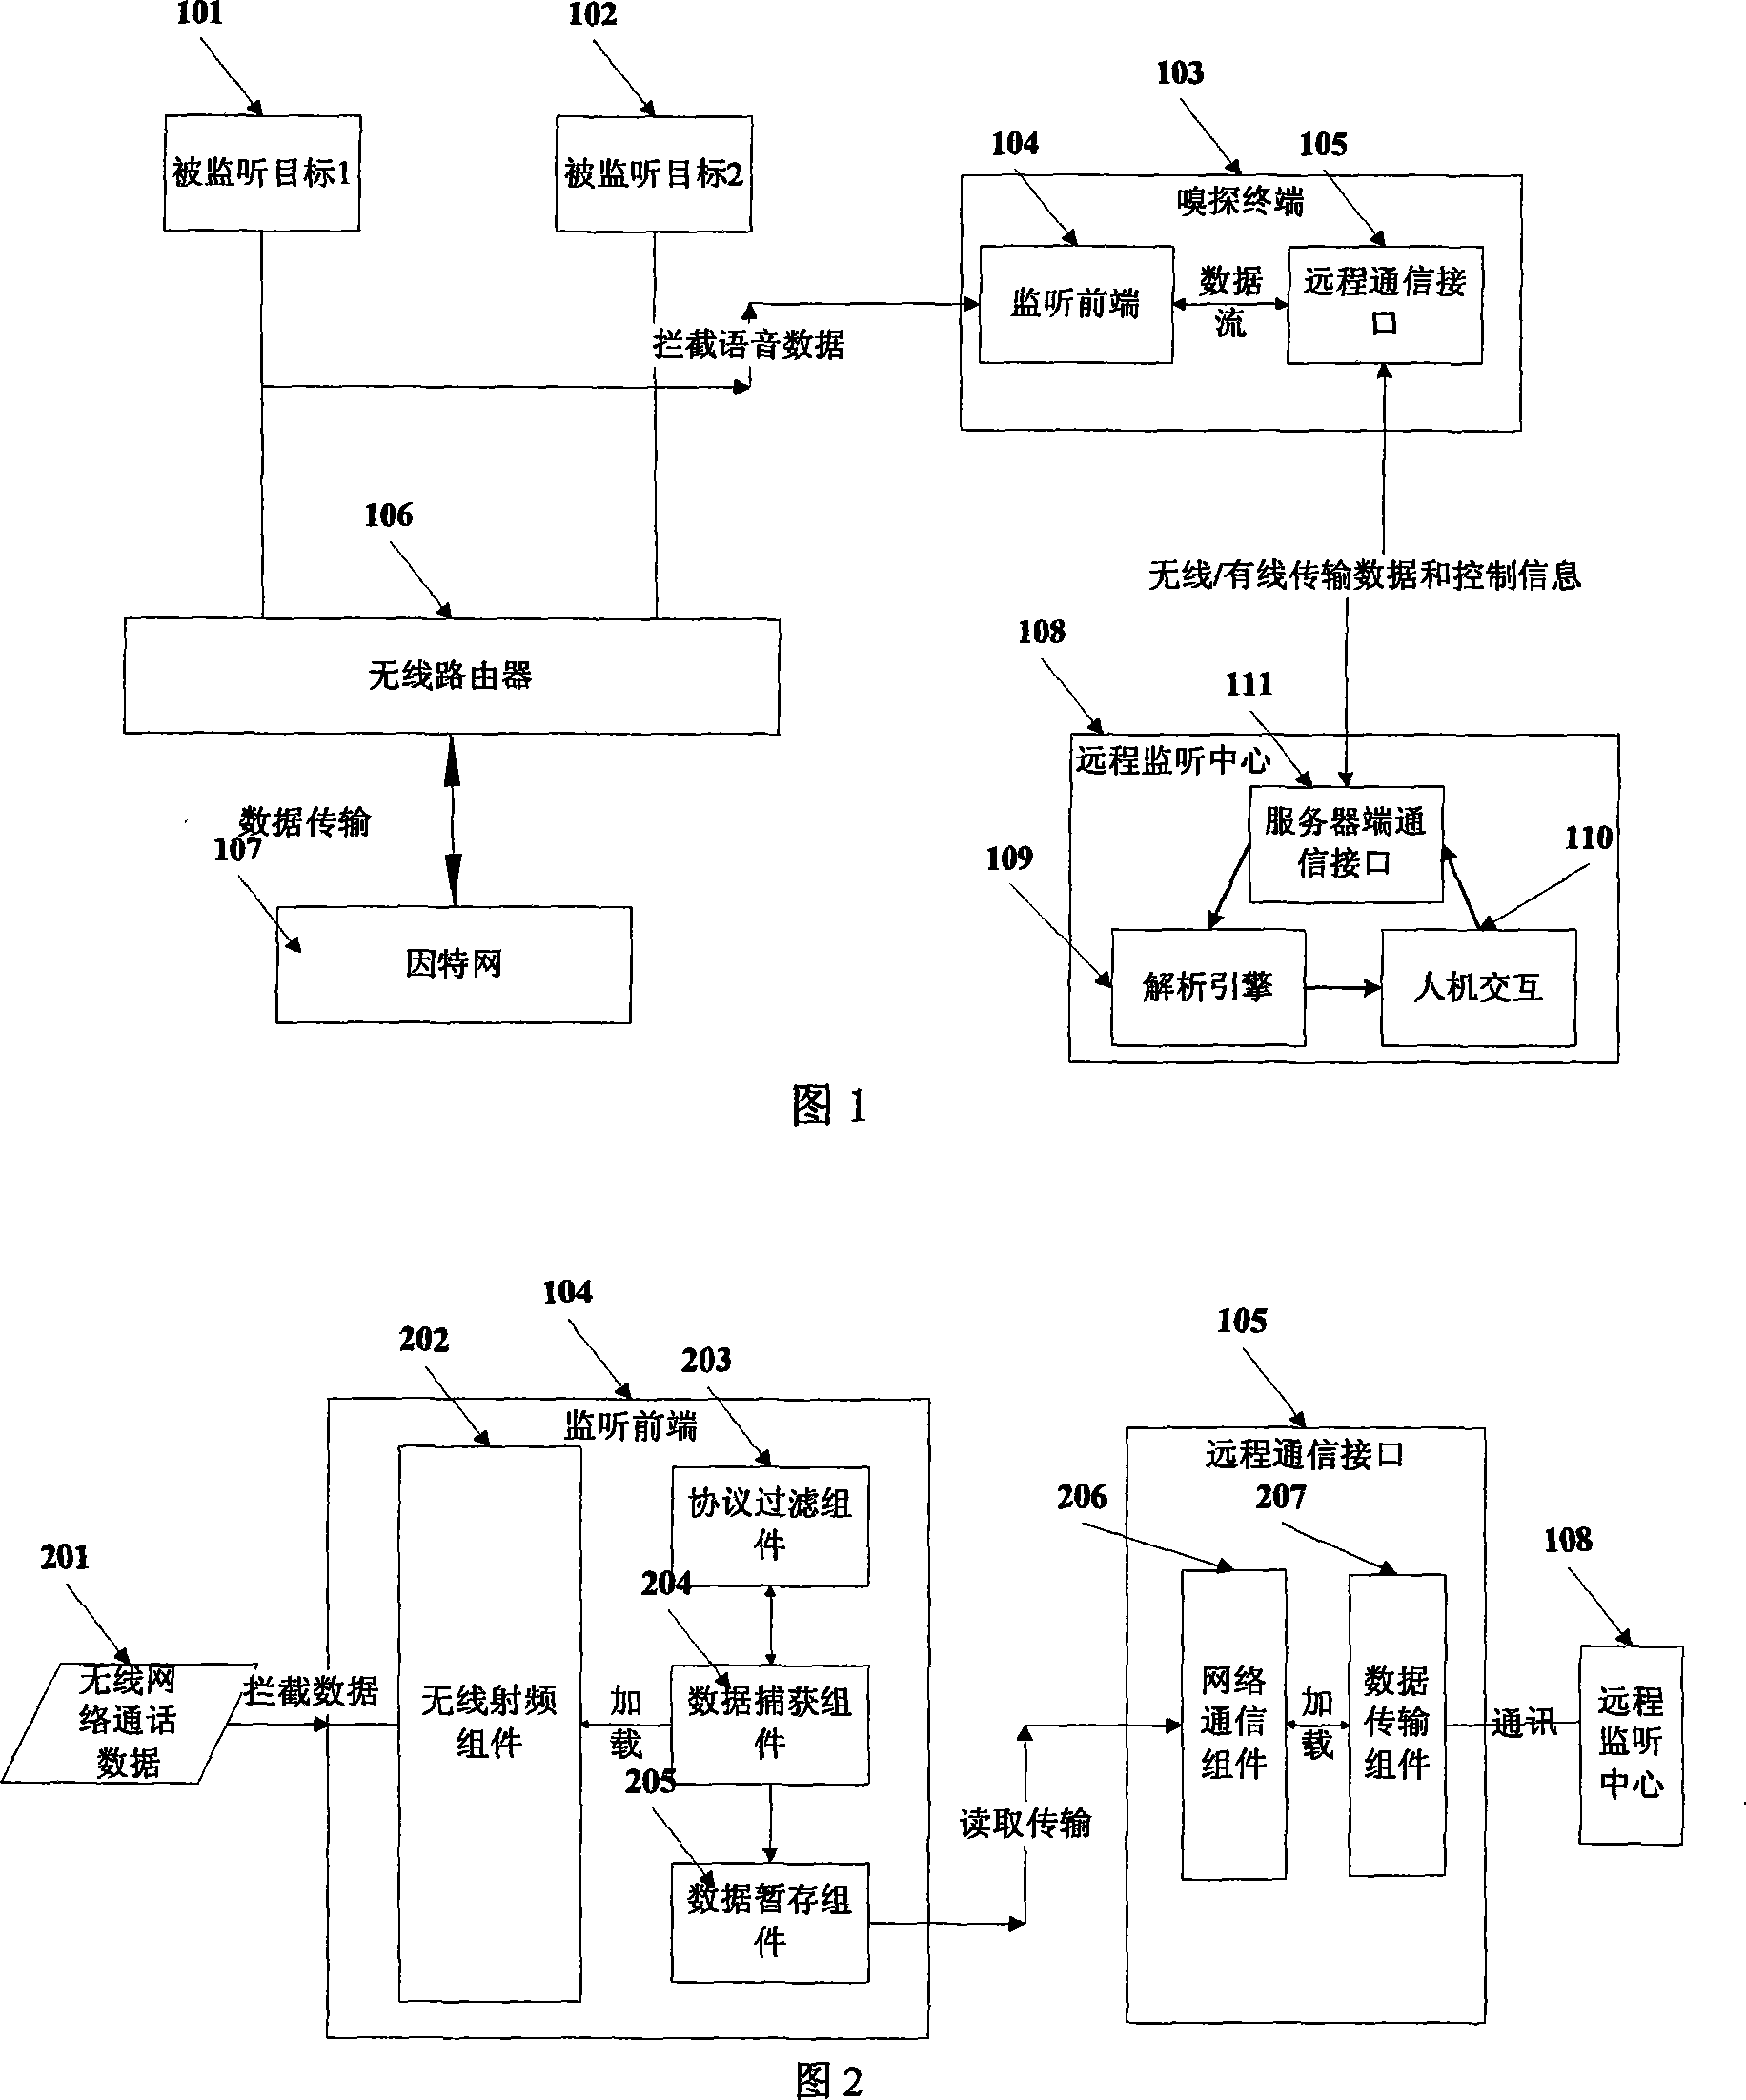 Monitoring method for wireless network call monitoring device based on distributed architecture